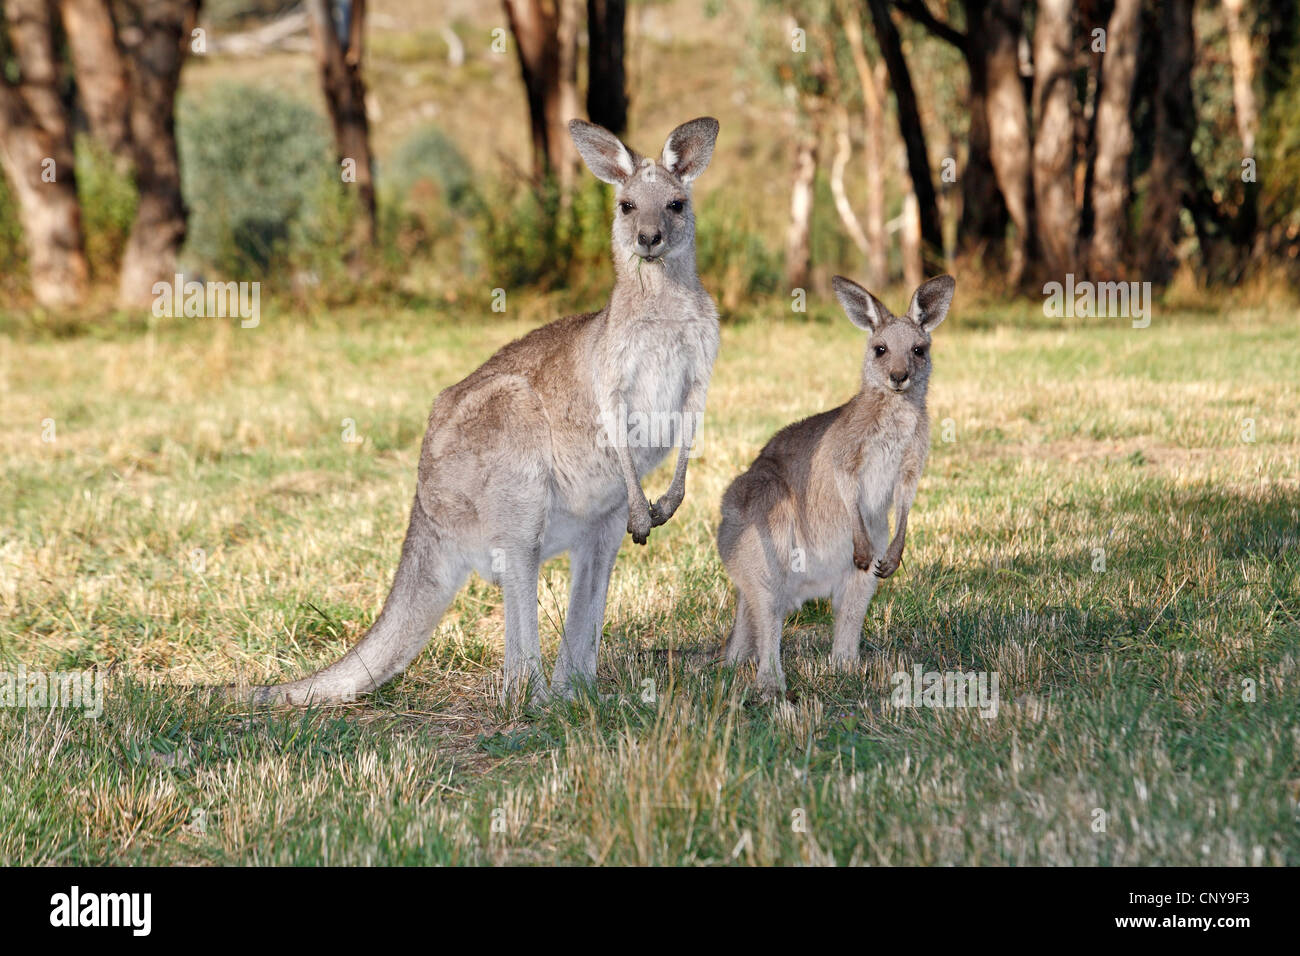 Two Eastern Grey Kangaroos, Macropus giganteus. A mother on the left and her half grown joey on the right. Stock Photo